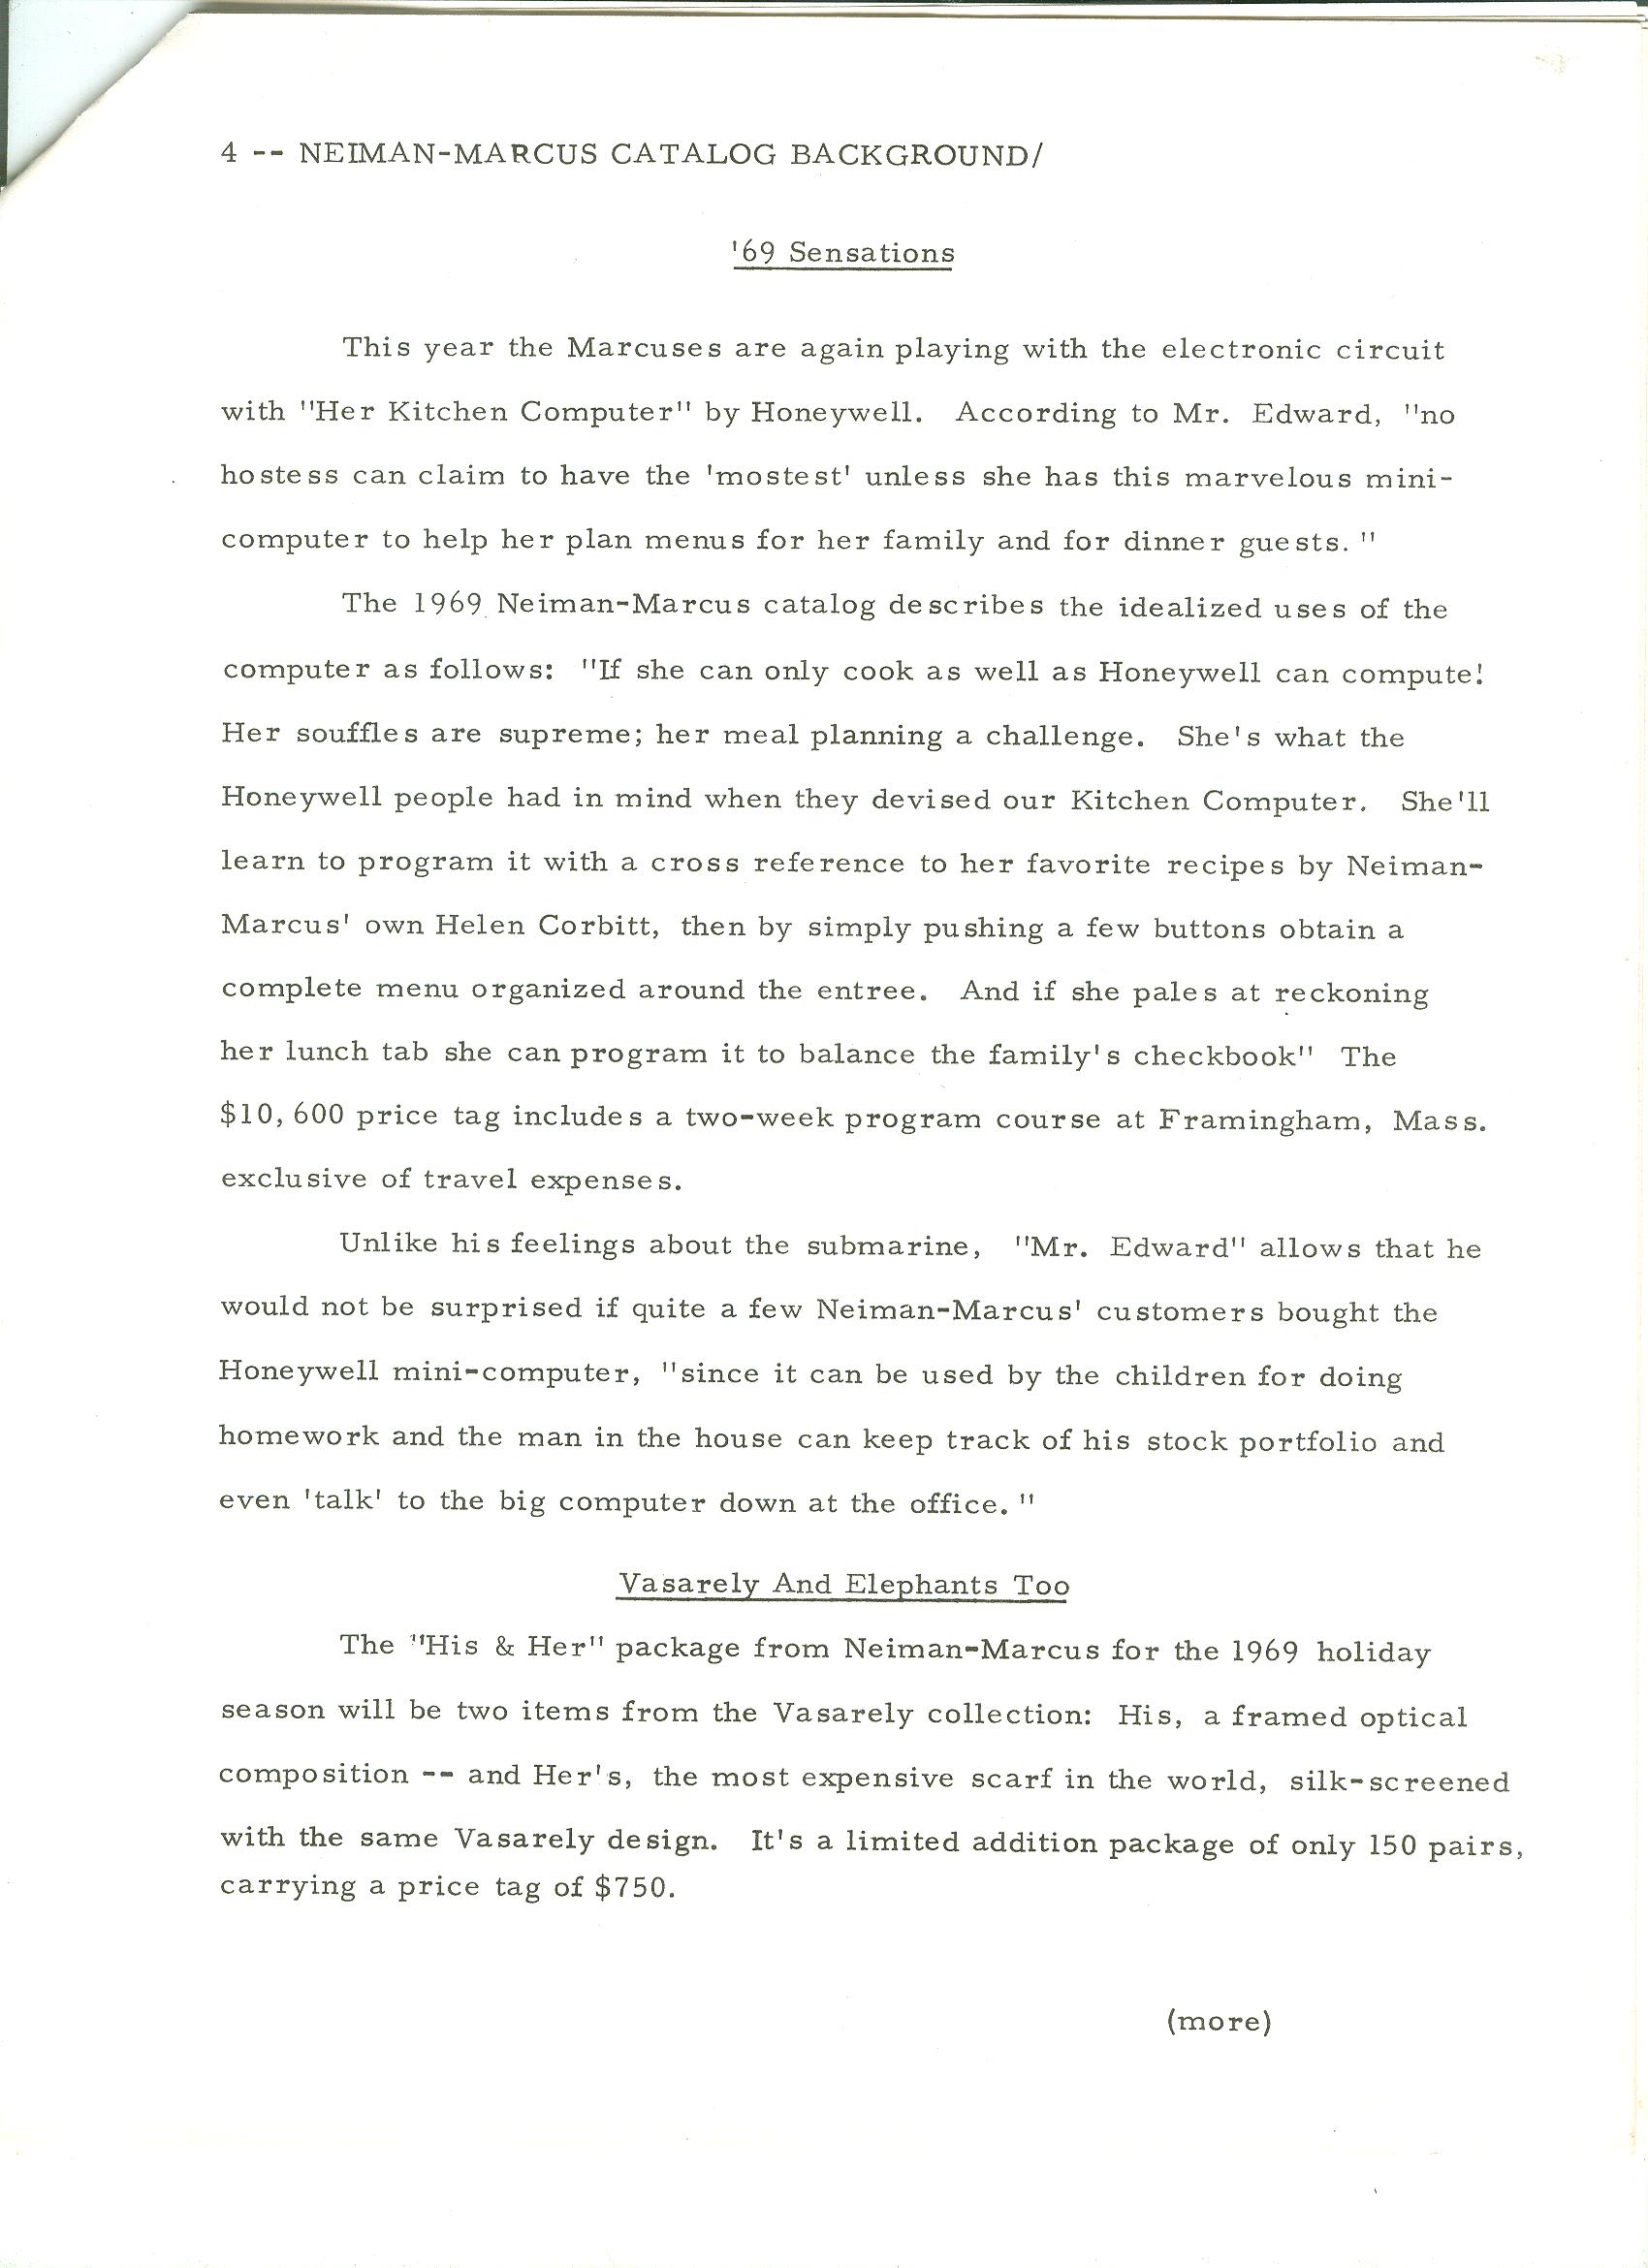 Press release for the Kitchen Computer (Honeywell 316)